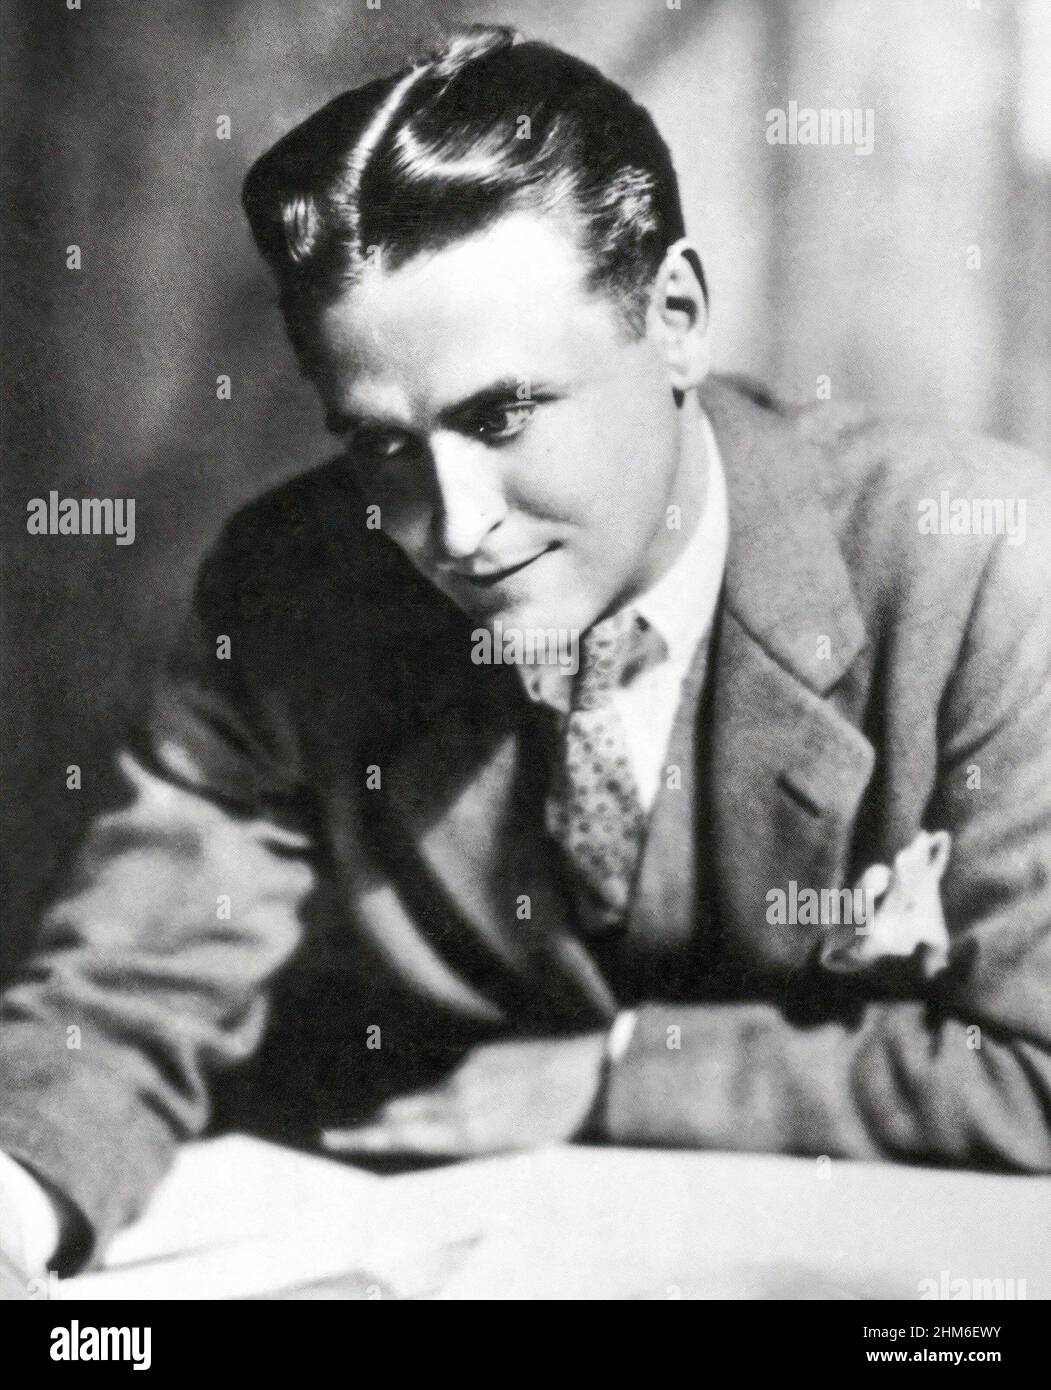 The american writer F Scott Fitzgerald, author of The Great Gatsby, in 1929 aged 33. Stock Photo